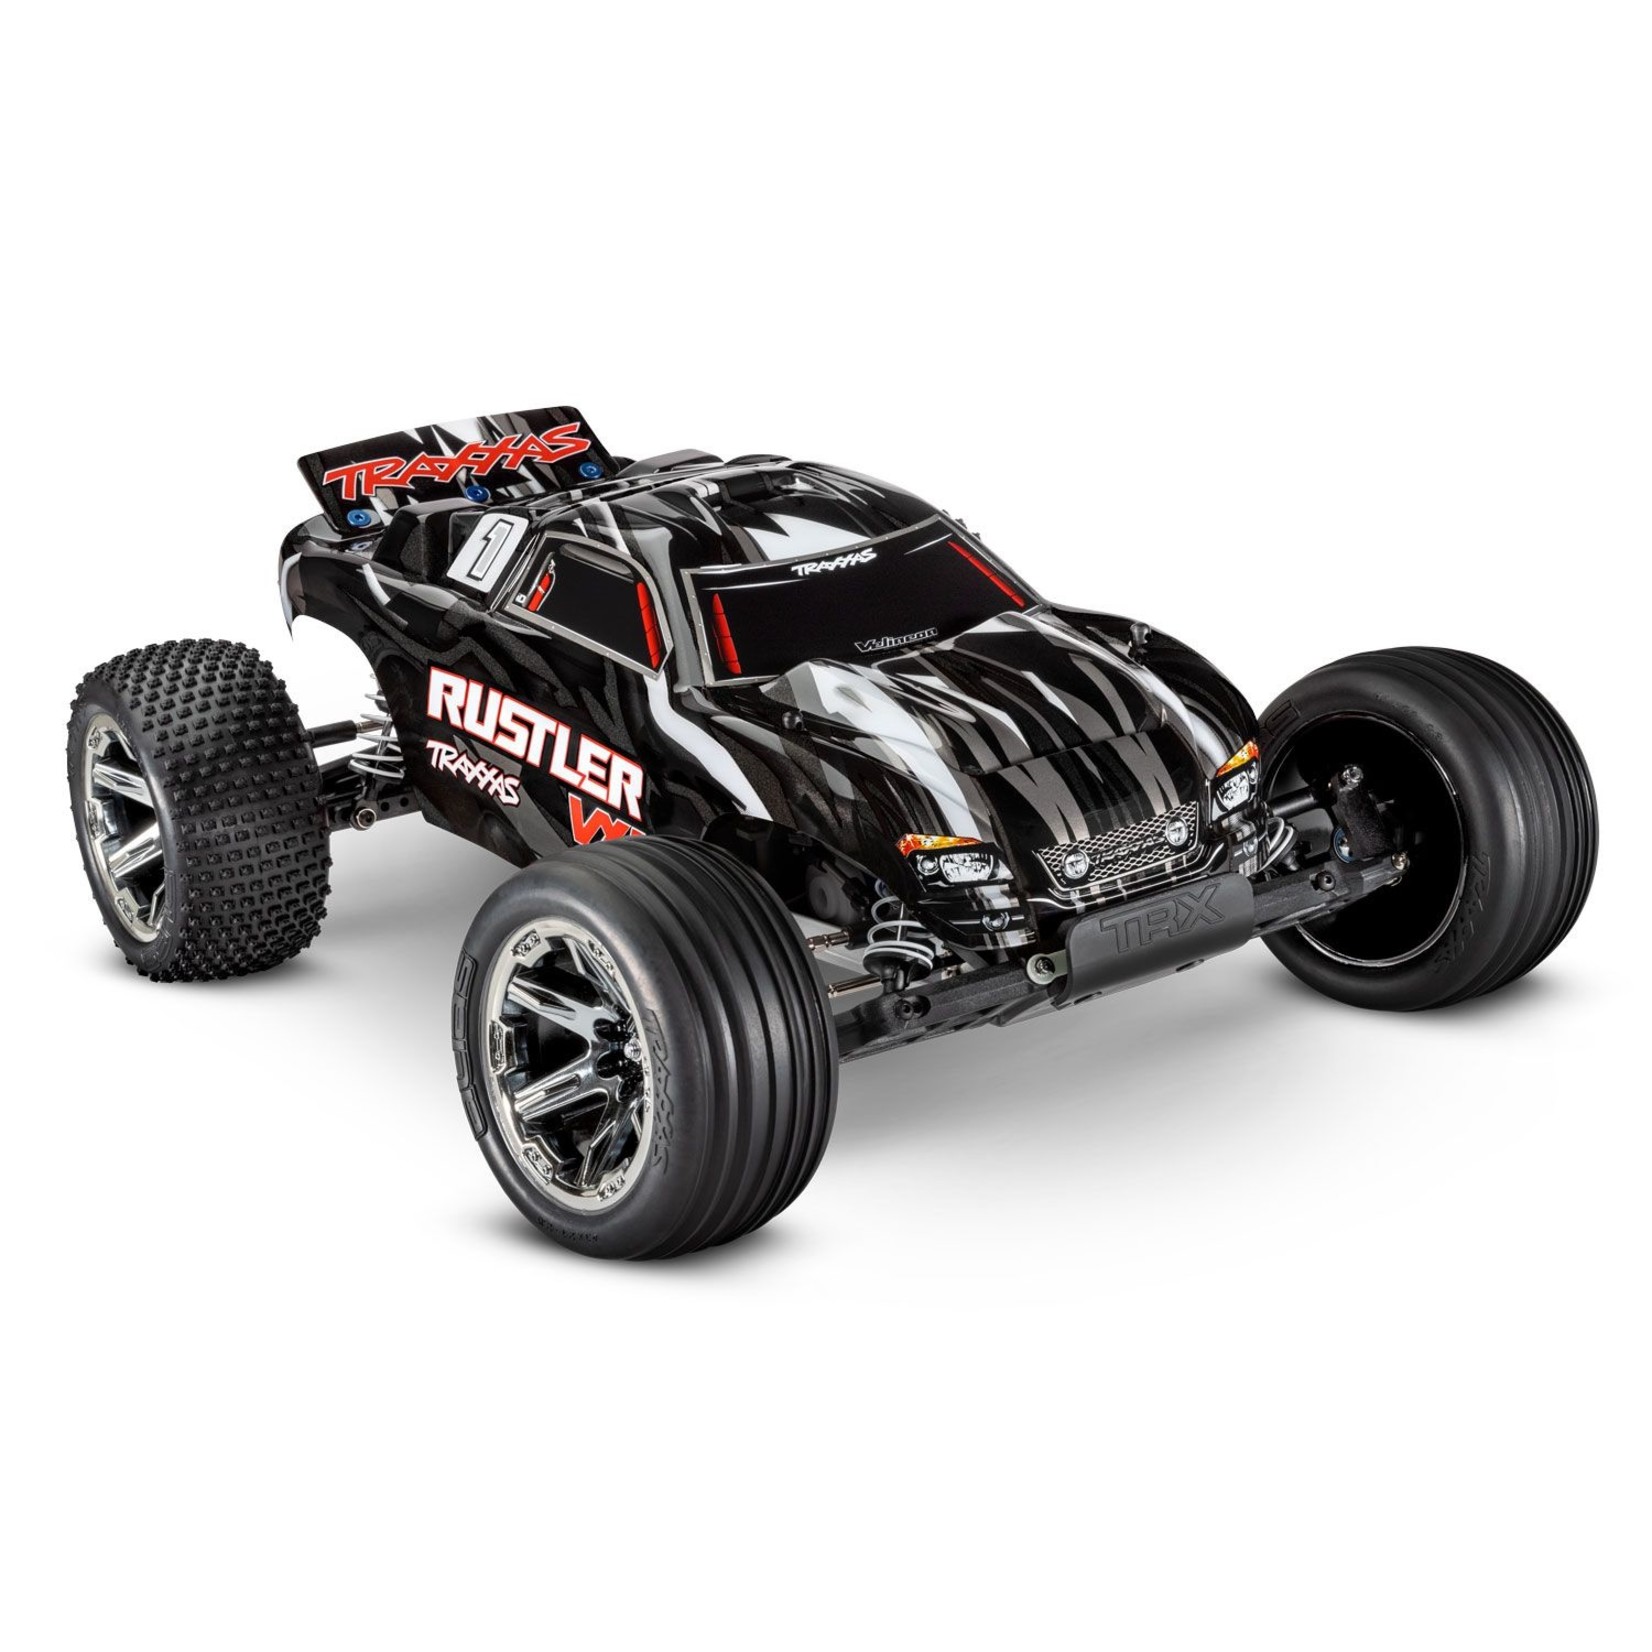 Traxxas Rustler VXL: 1/10 Scale 2WD Brushless Stadium Truck with Magnum  272R transmission and Traxxas Stability Management (TSM) - RC Hobby Shop